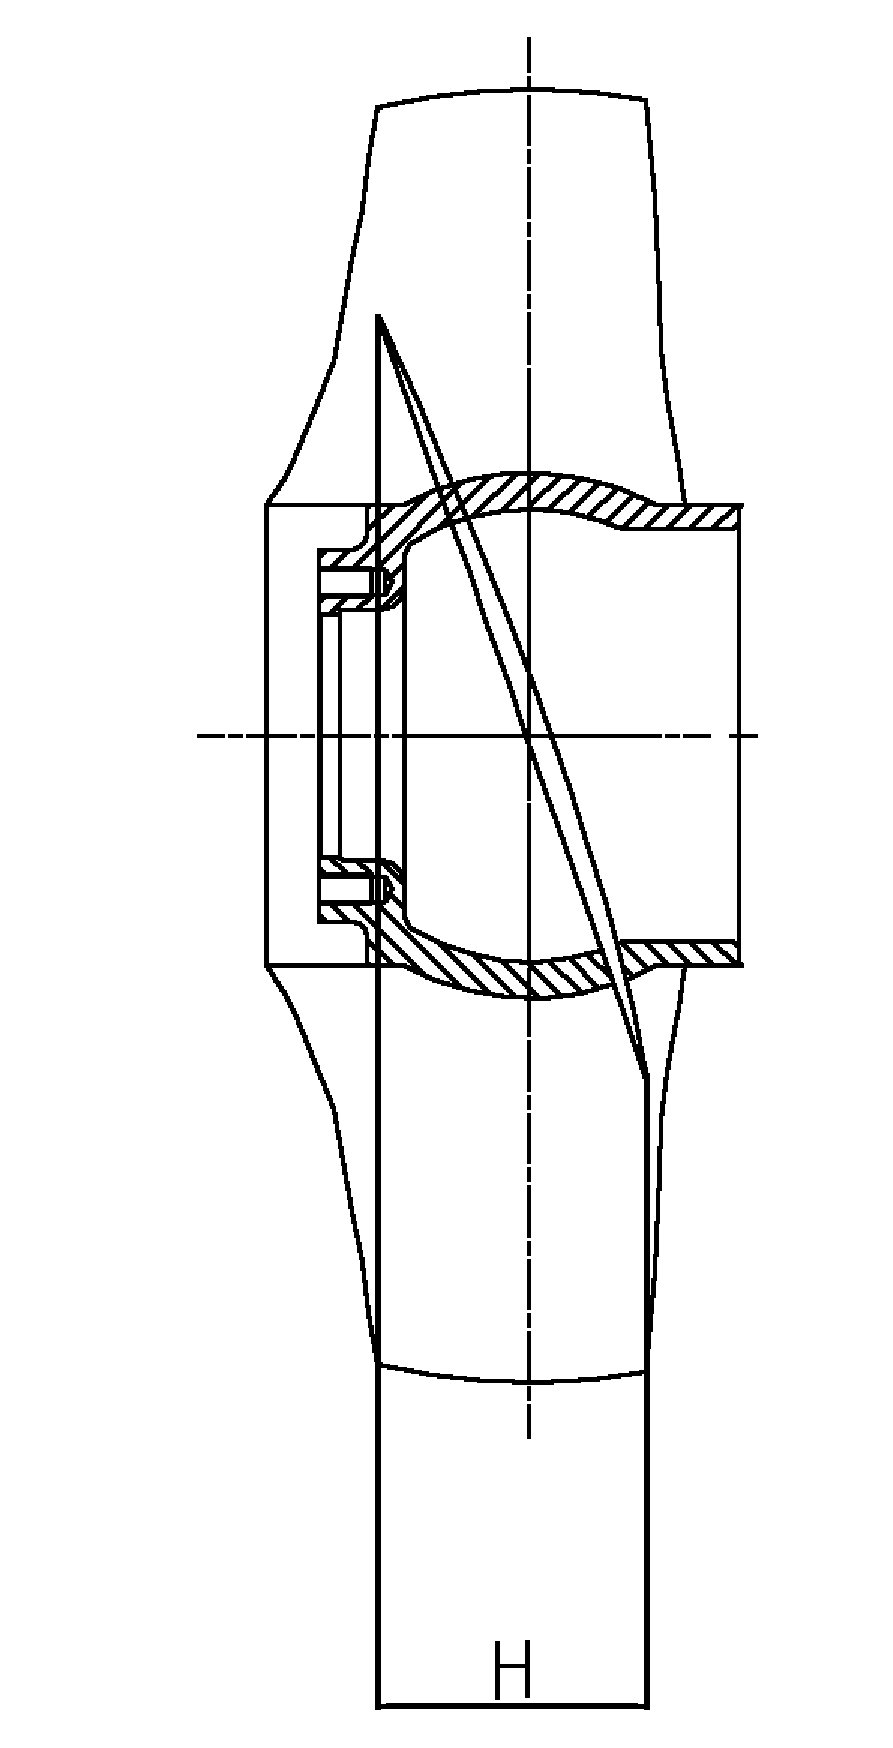 Method for ensuring inclination angle of blades of water pump